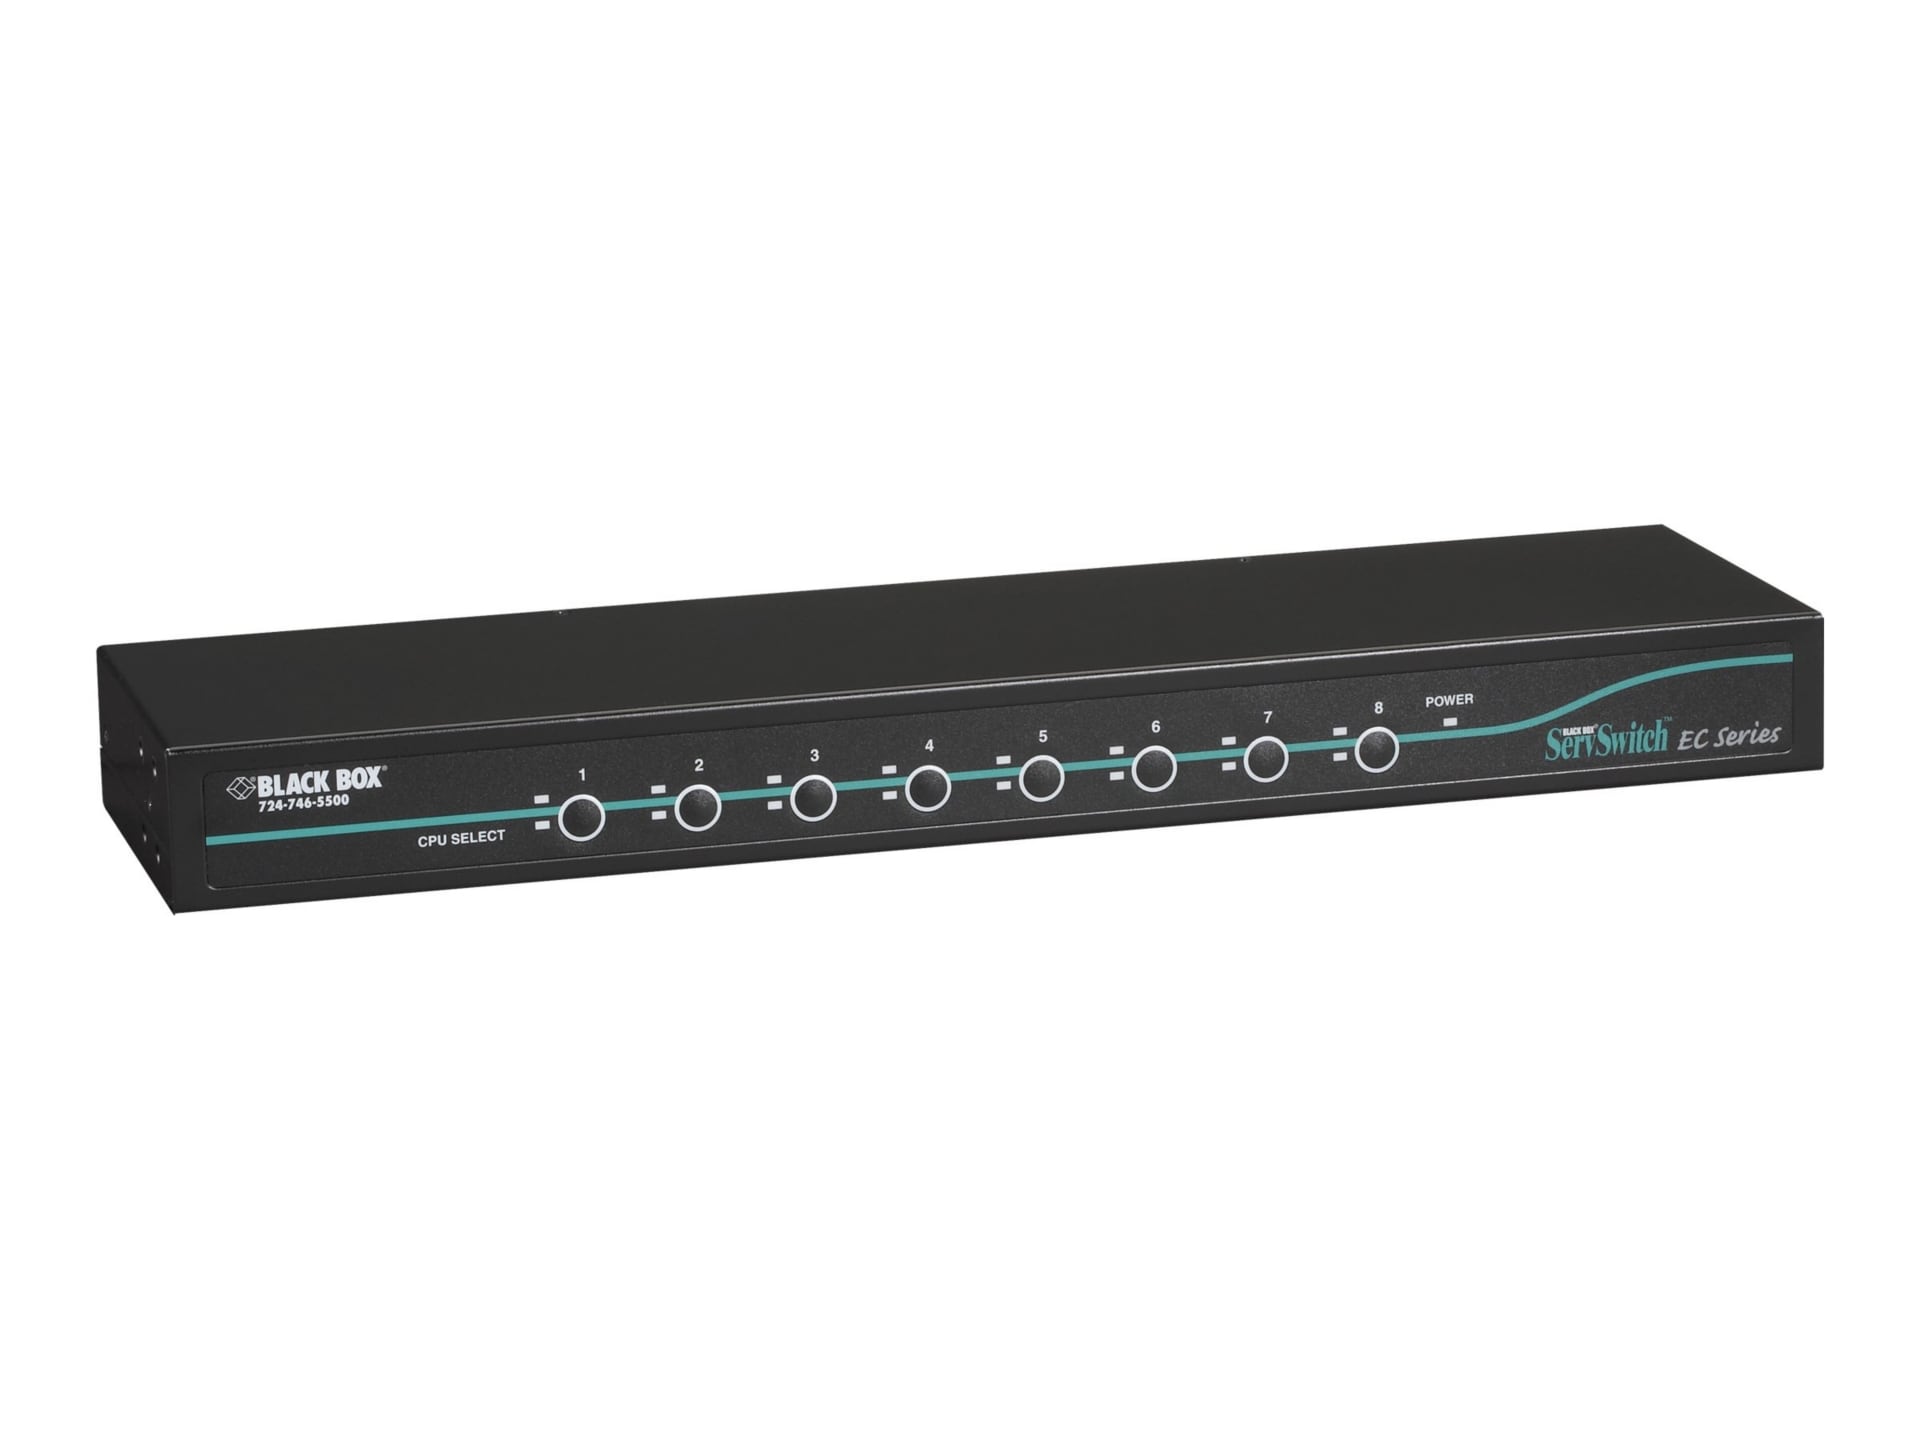 Black Box ServSwitch EC for PS/2 and USB Servers and PS/2 or USB Consoles - KVM switch - 8 ports